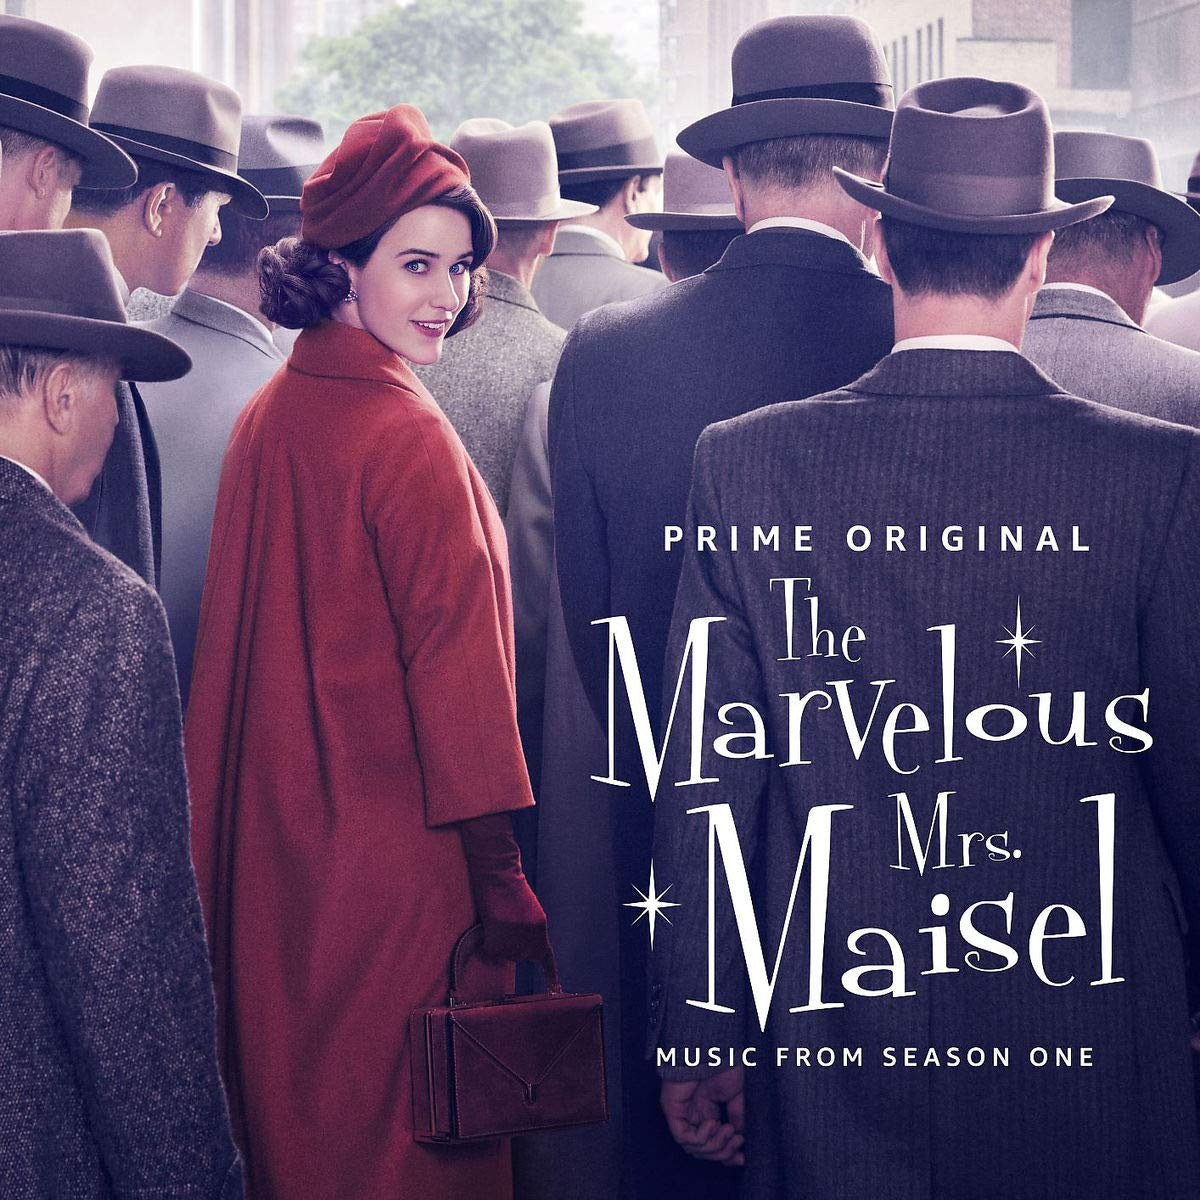 Various - The Marvelous Mrs. Maisel: Music From Season One (Prime Original Series) - New LP Record 2019 UMe Vinyl - Soundtrack / Television